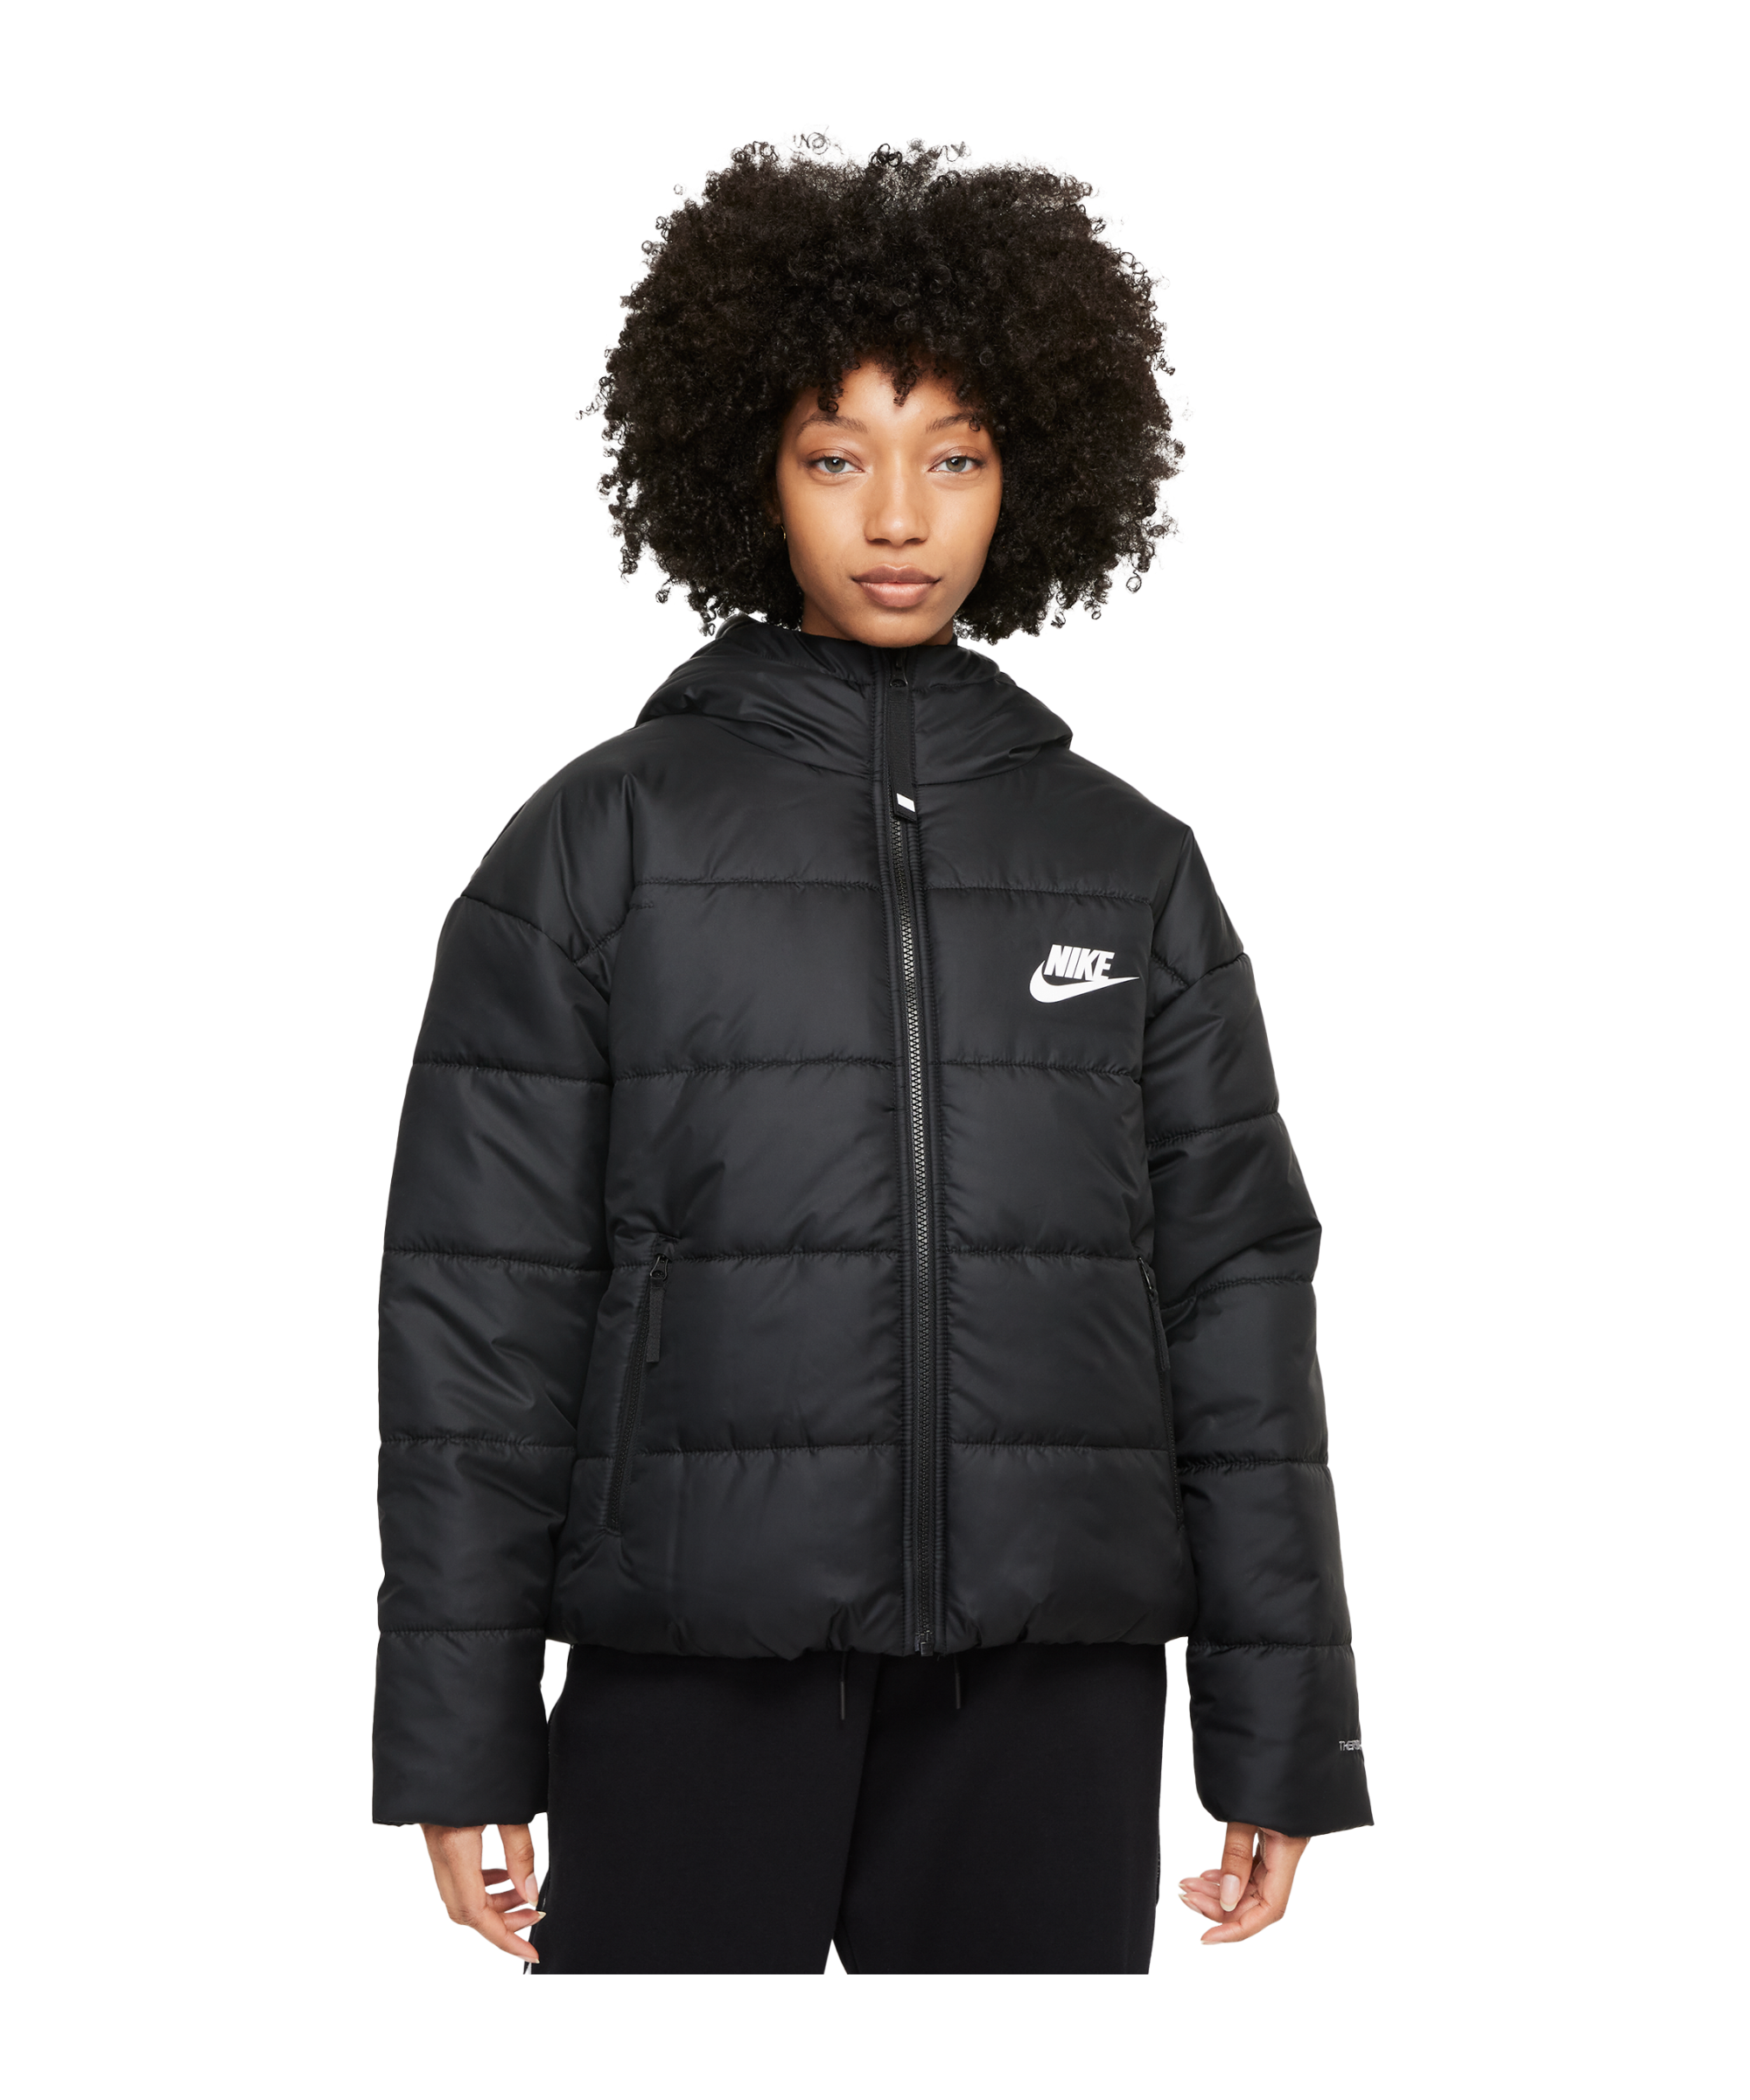 Nike Therma-FIT Repel Classic Jacket Women - Black